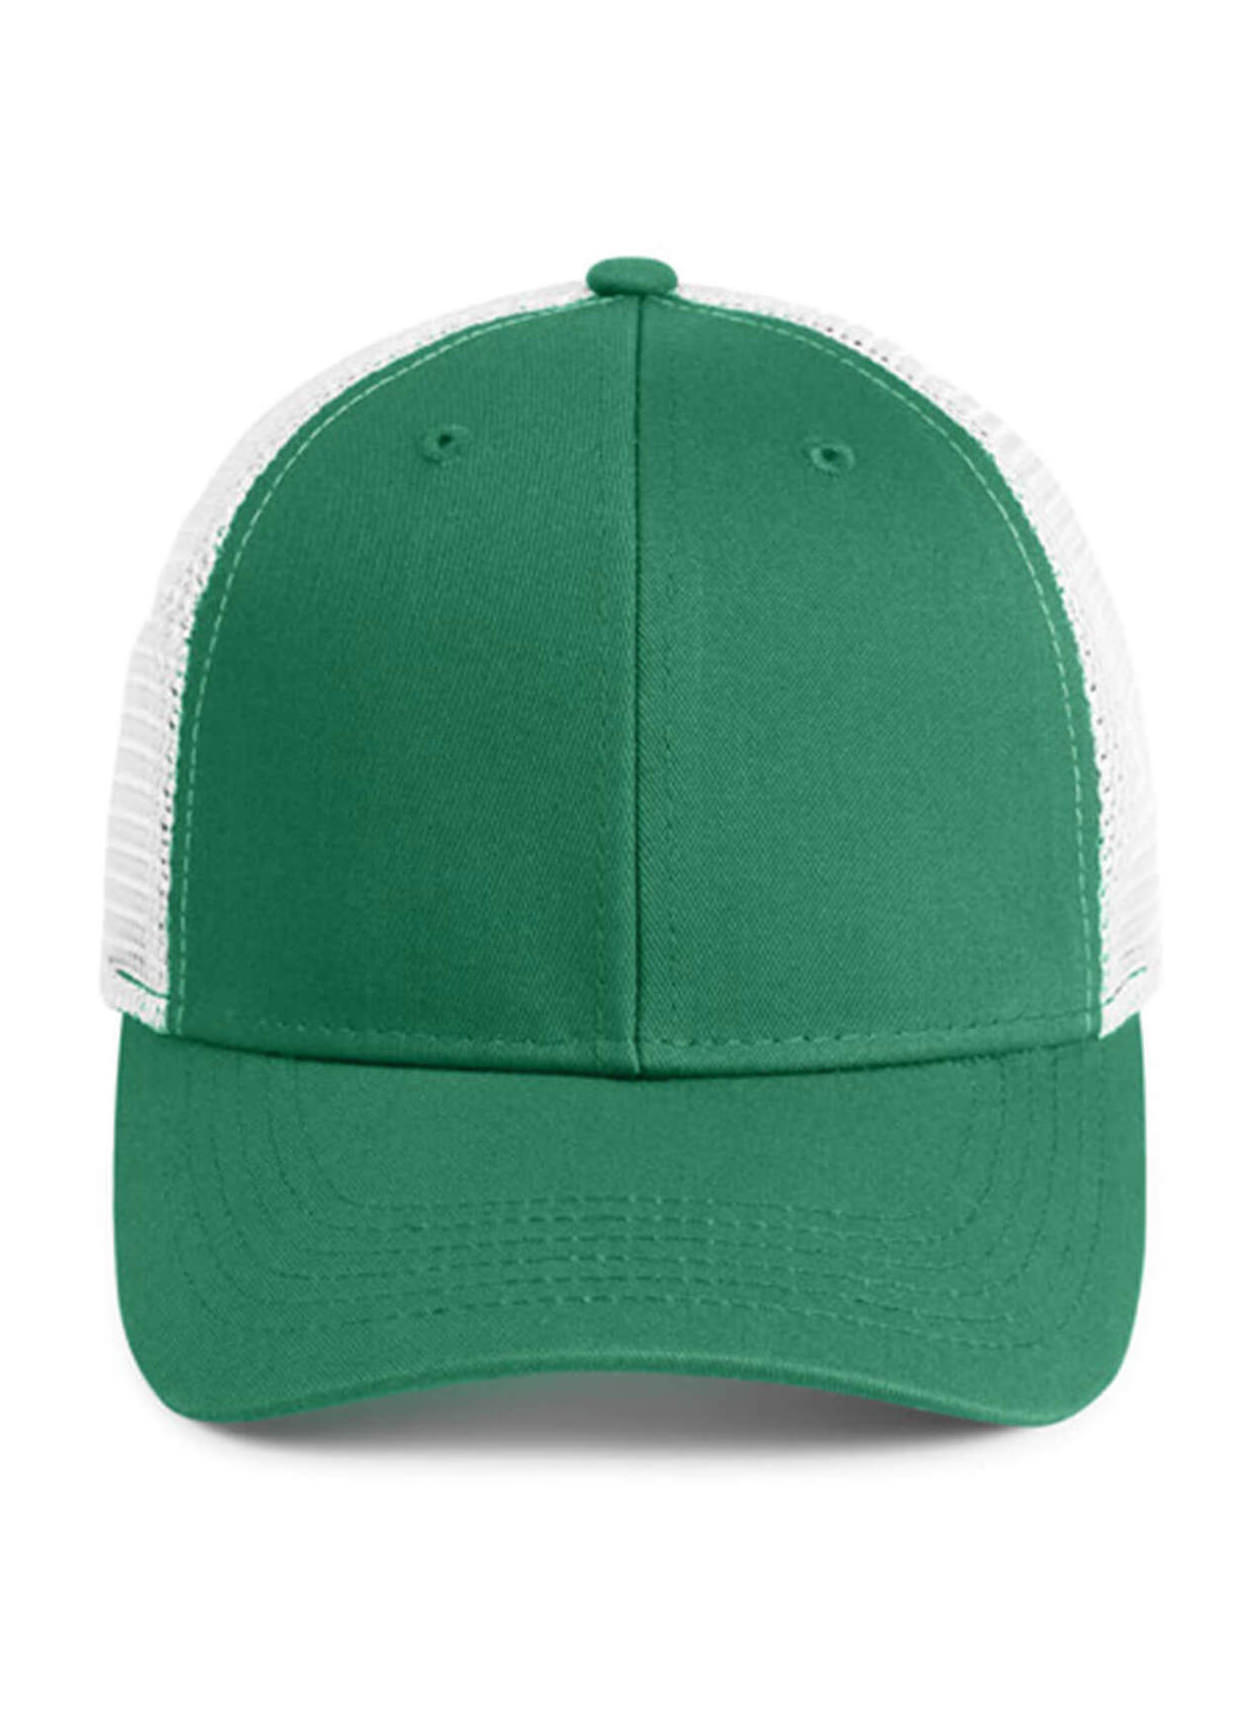 Imperial Grass / White The Catch & Release Hat Adjustable Meshback Hat